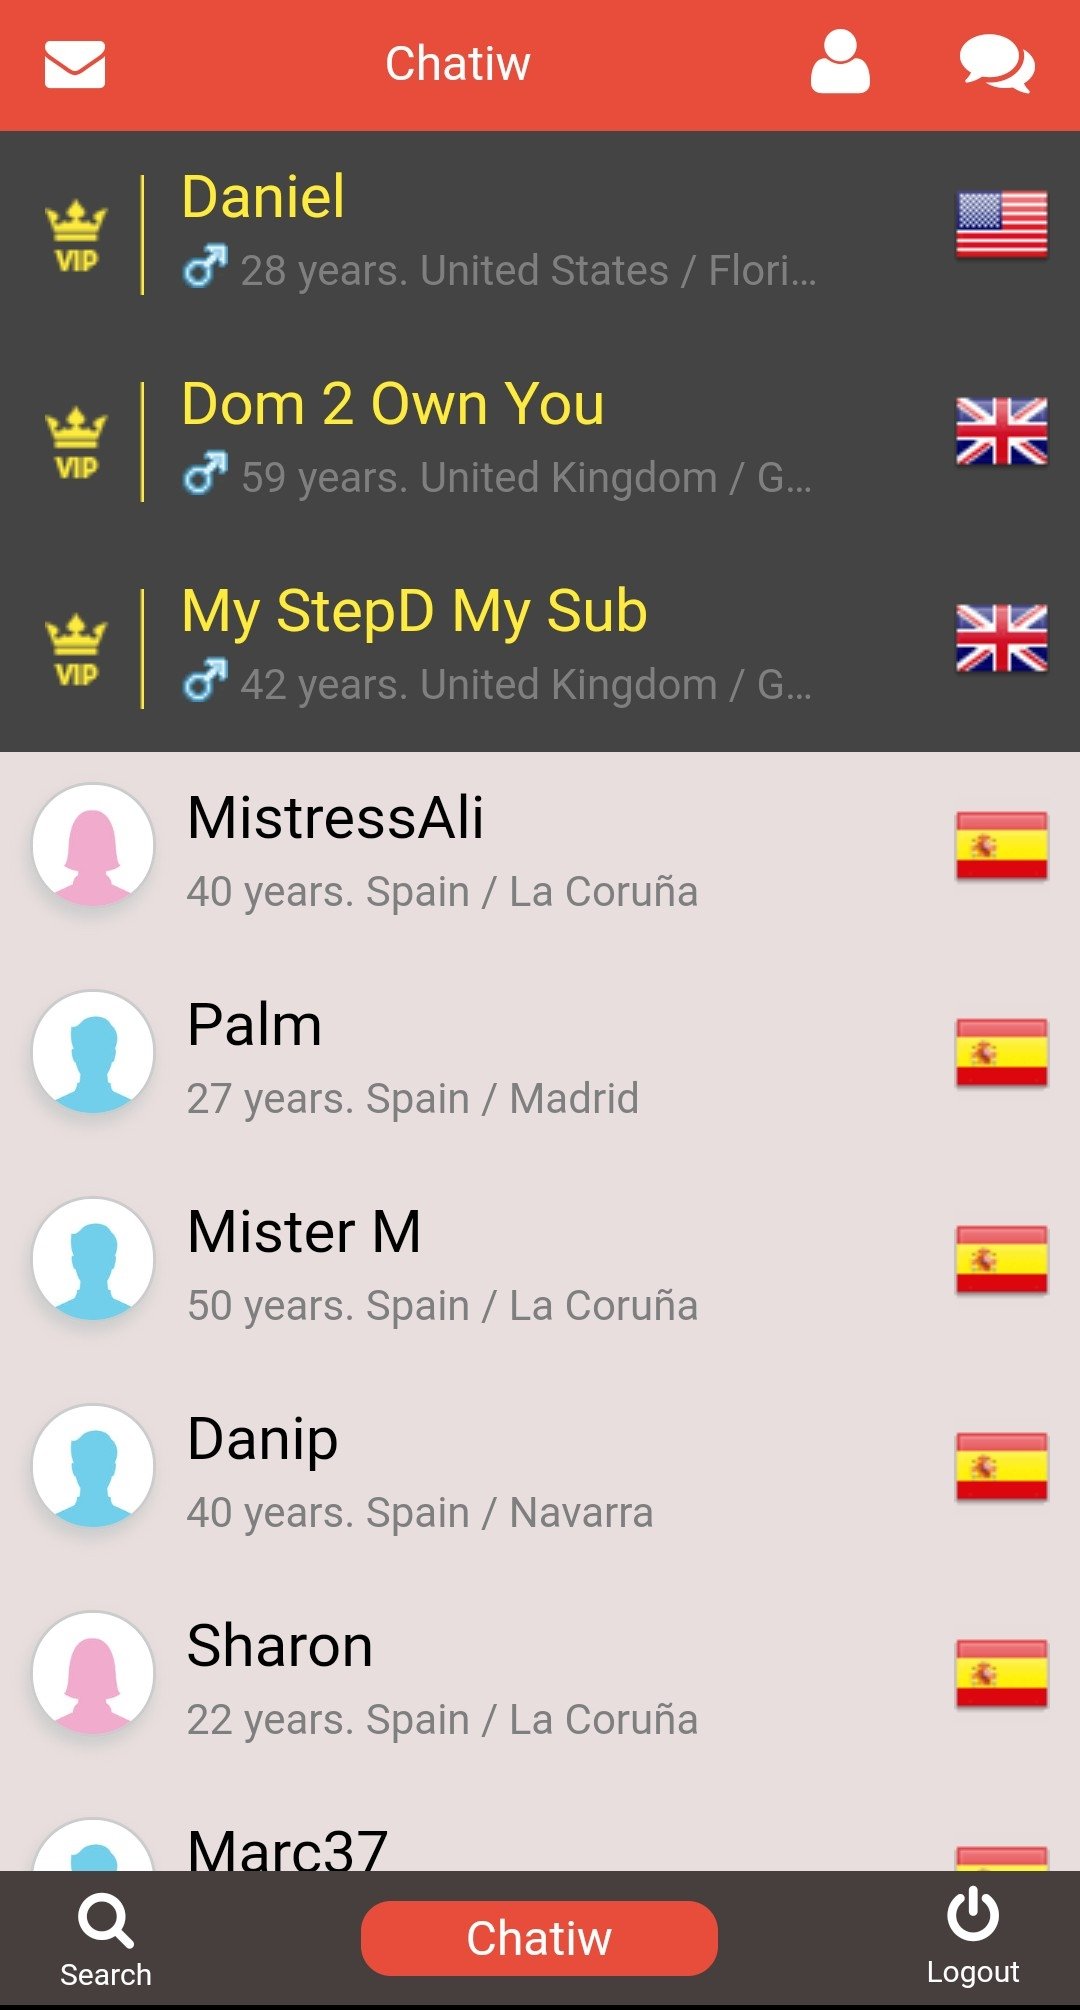 Chatiw is an application for chatting with people from all over the world u...